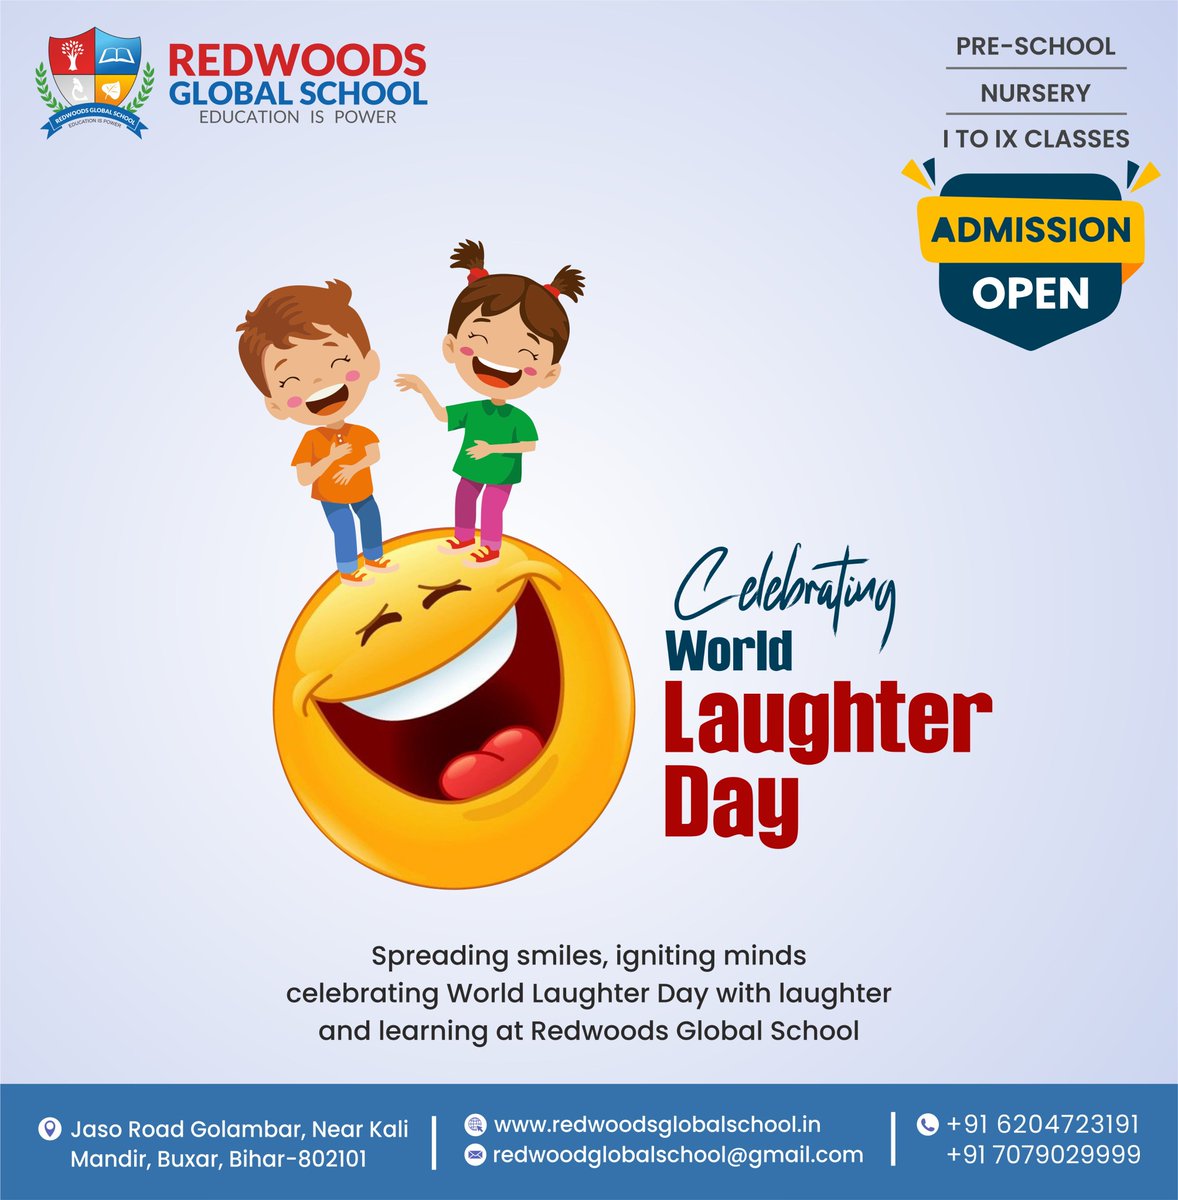 Spreading smiles, igniting minds - celebrating World Laughter Day with laughter and learning at Redwoods Global School.
#redwoodsglobalschool #worldlaughterday #education #buxar #Bihar #educationforall #educationmatters #admissionopen #EducationOpportunity